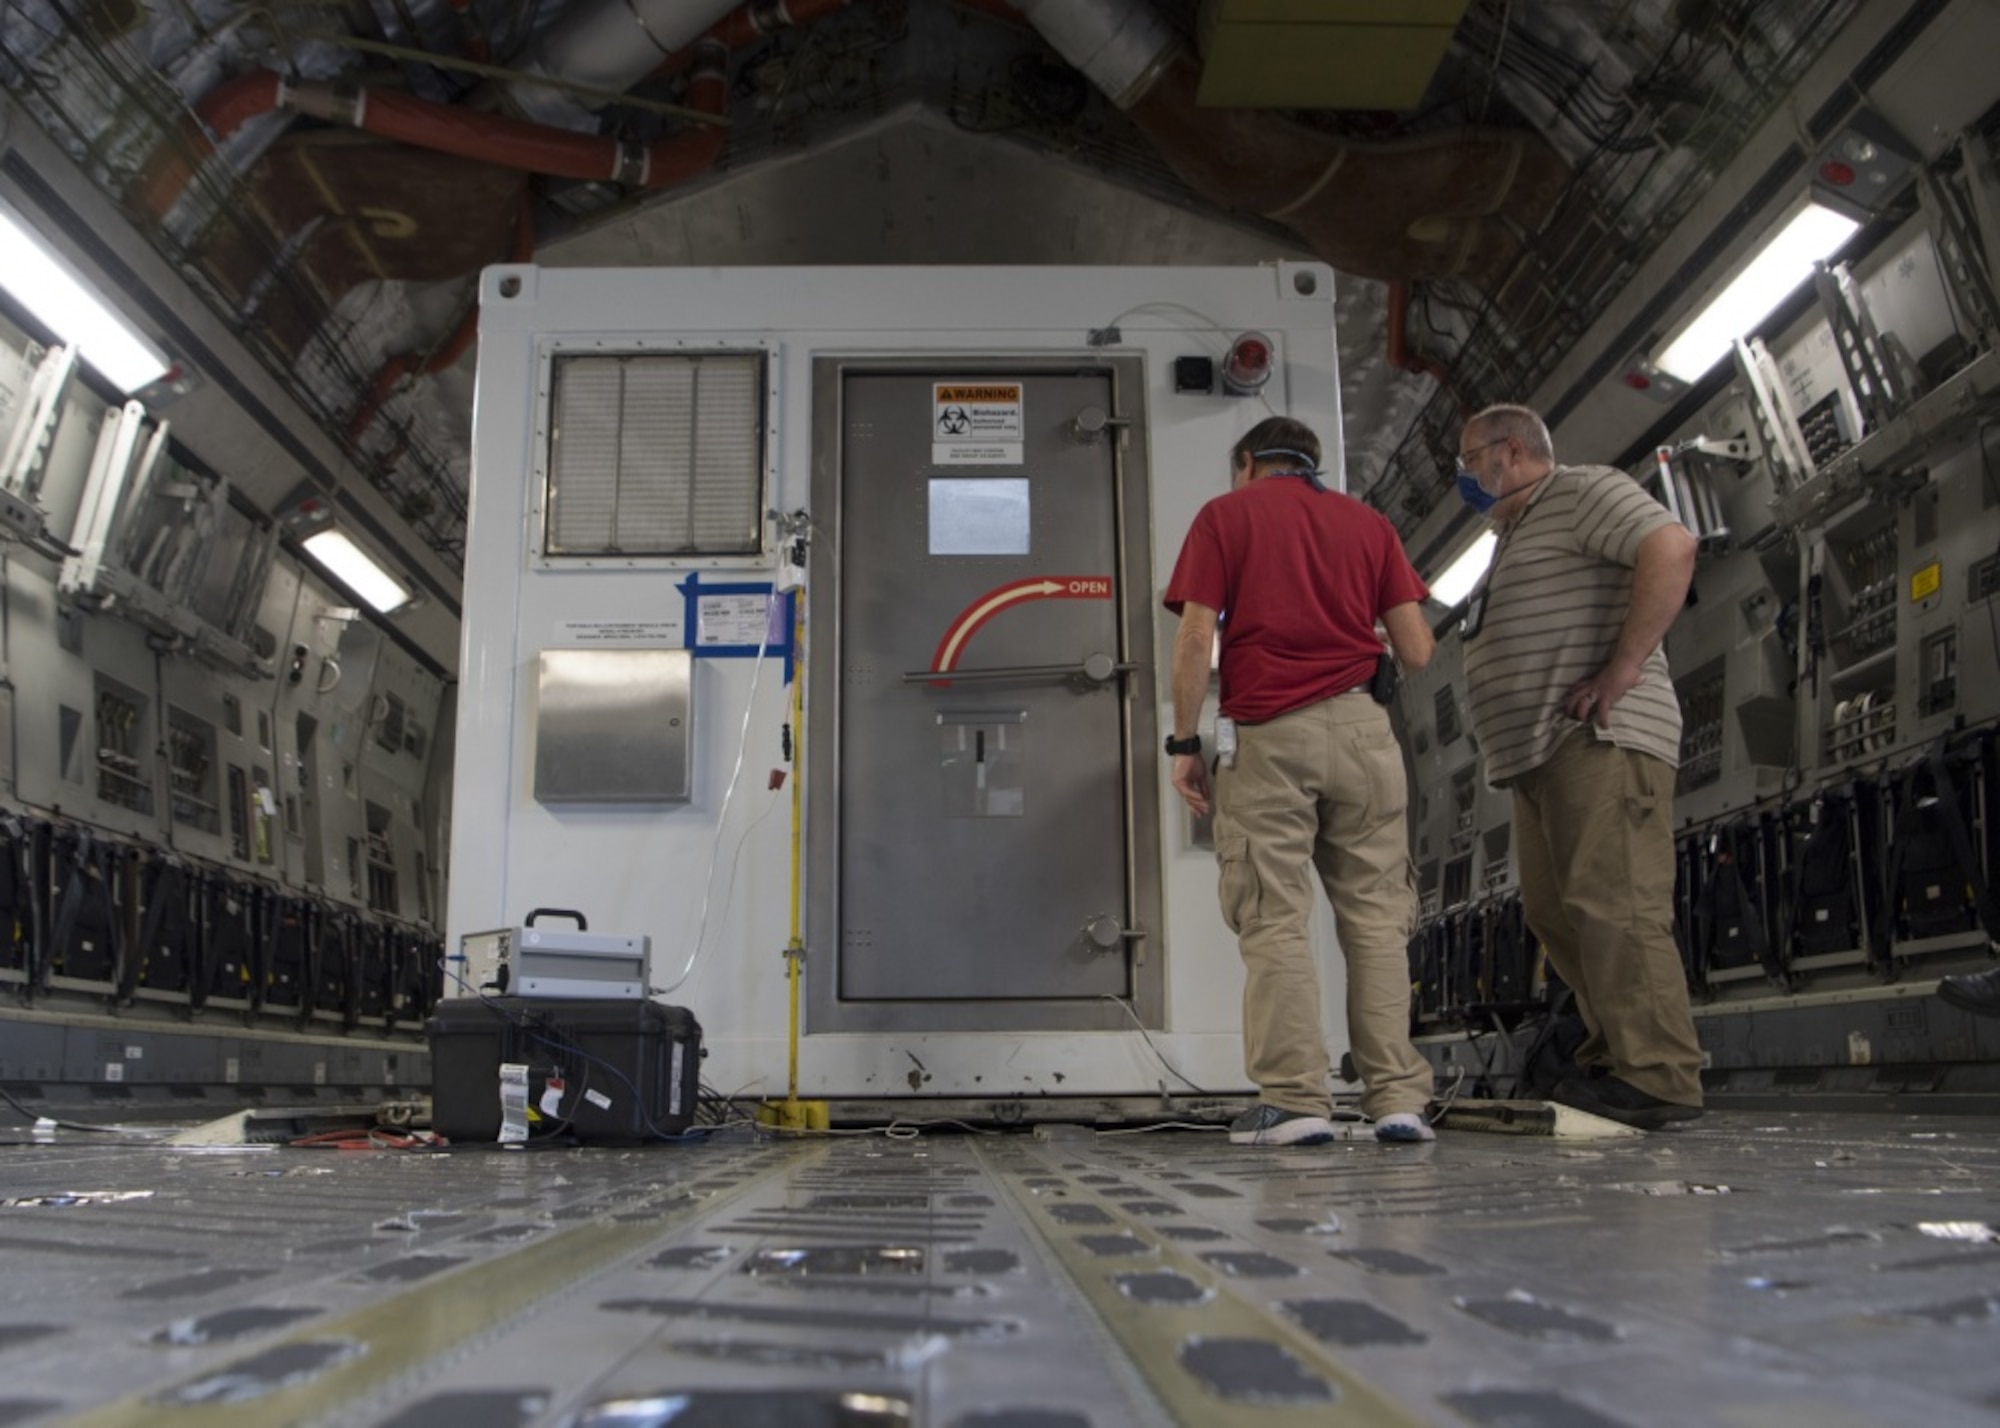 Victor Arca, 28th Test and Evaluation Squadron senior test engineer, and Gabriel Intano, Army Public Health Center microbiologist, collect data while performing testing on a Portable Bio-Containment Module loaded onto a C-17 Globemaster III at Joint Base Charleston S.C., April 15, 2020. Members from the 28th TES and Army PHC tested the PBCM, which will be exercised regularly to transport COVID patients and medical personnel, all while ensuring the aircrew is impervious to risk of infection. (U.S. Air Force photo by Staff Sgt. Chris Drzazgowski)